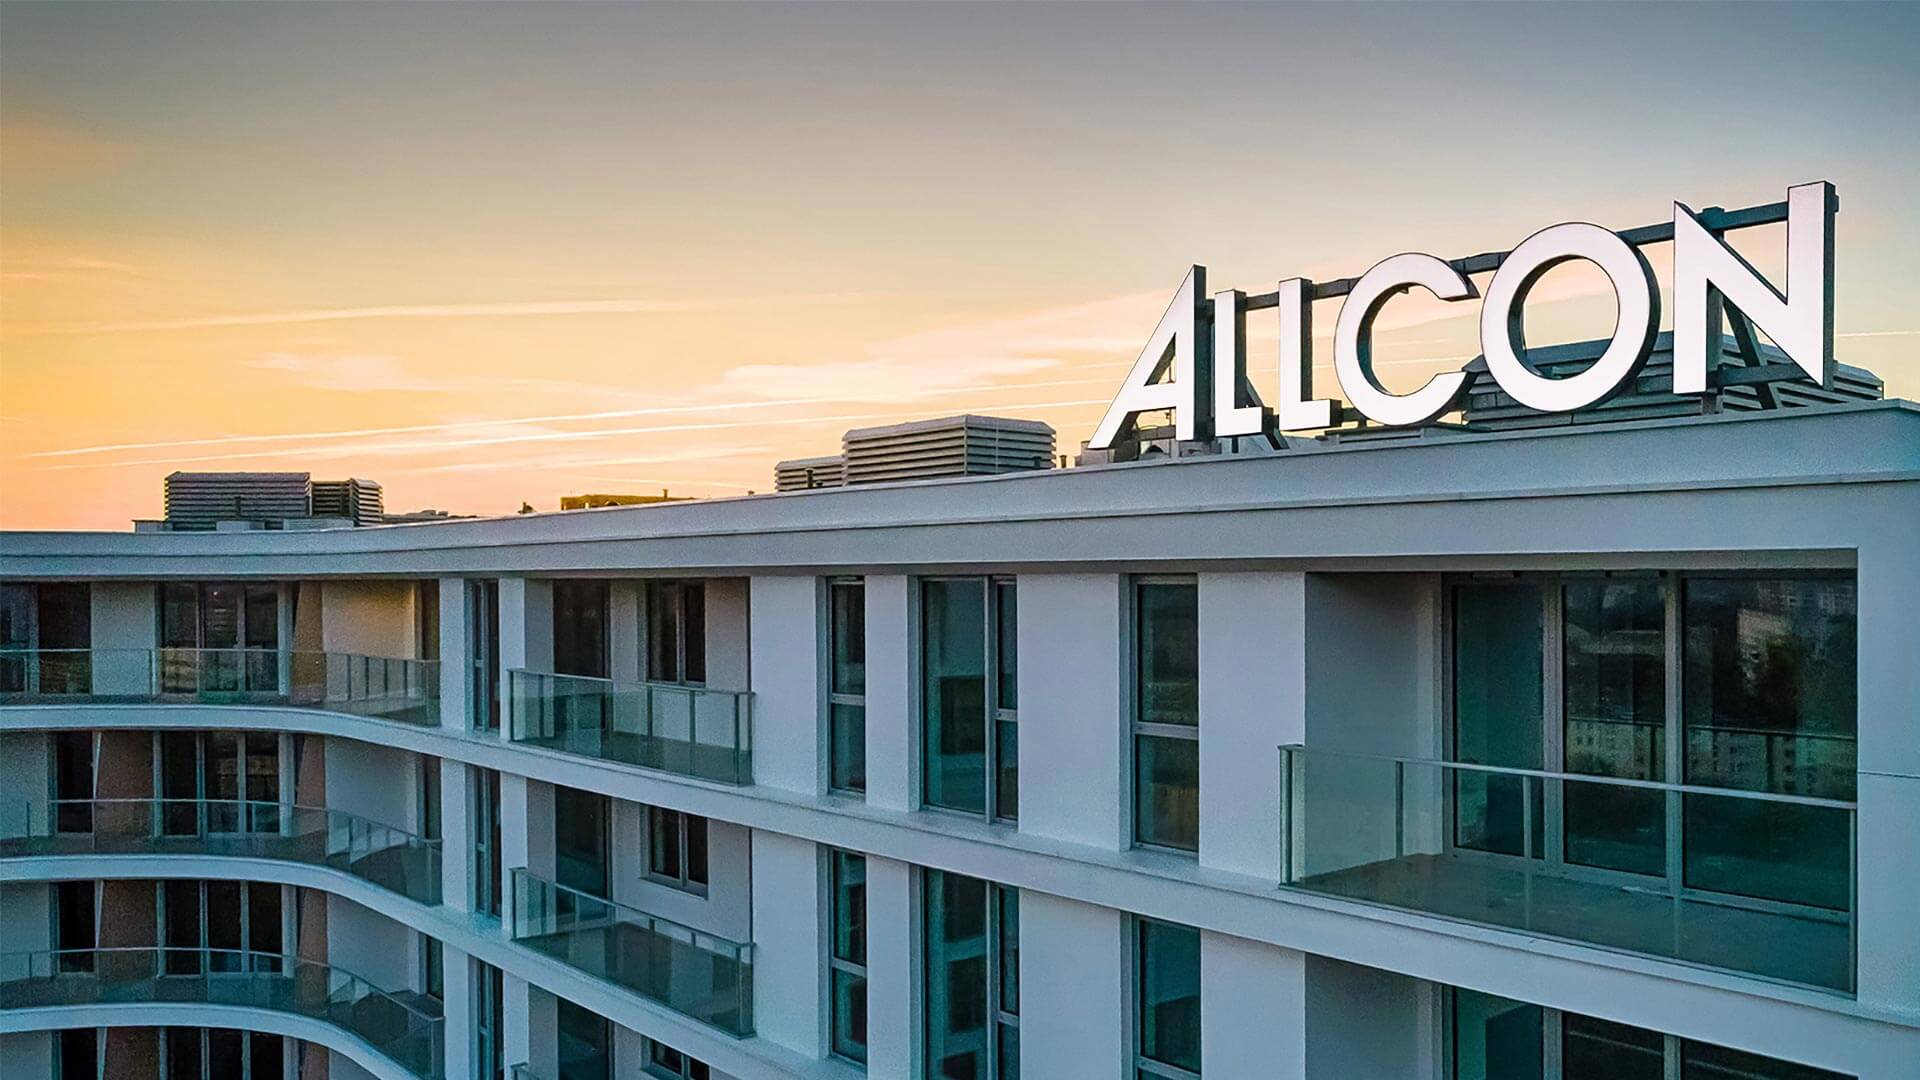 allcon-lettering-large format - allcon large format letters 3d-with-plexi-lighting-on-the-top-of-the-building